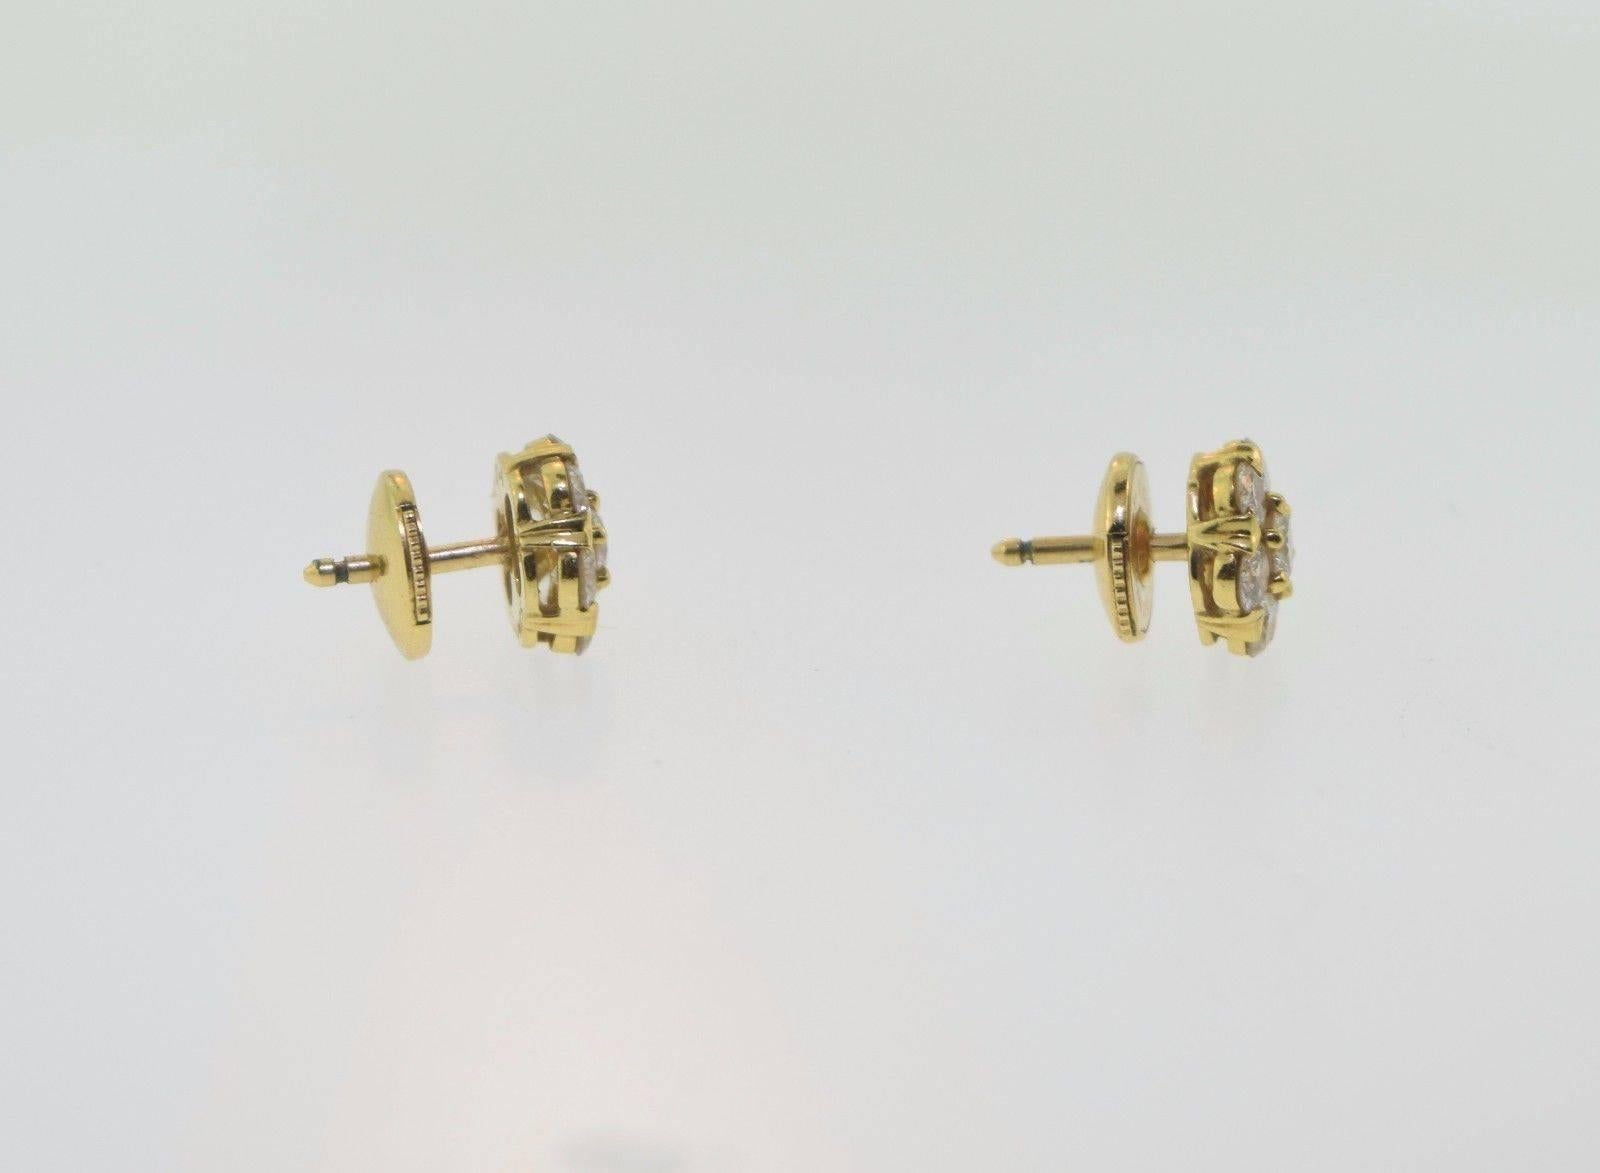 Fleurette ear studs, small model, round diamonds.

Featuring an emblematic motif in the jewelry of Van Cleef & Arpels, the Fleurette collection brings seven round diamonds together in a dazzling corolla.
Metal: yellow gold
Purity: 18k
Diamond